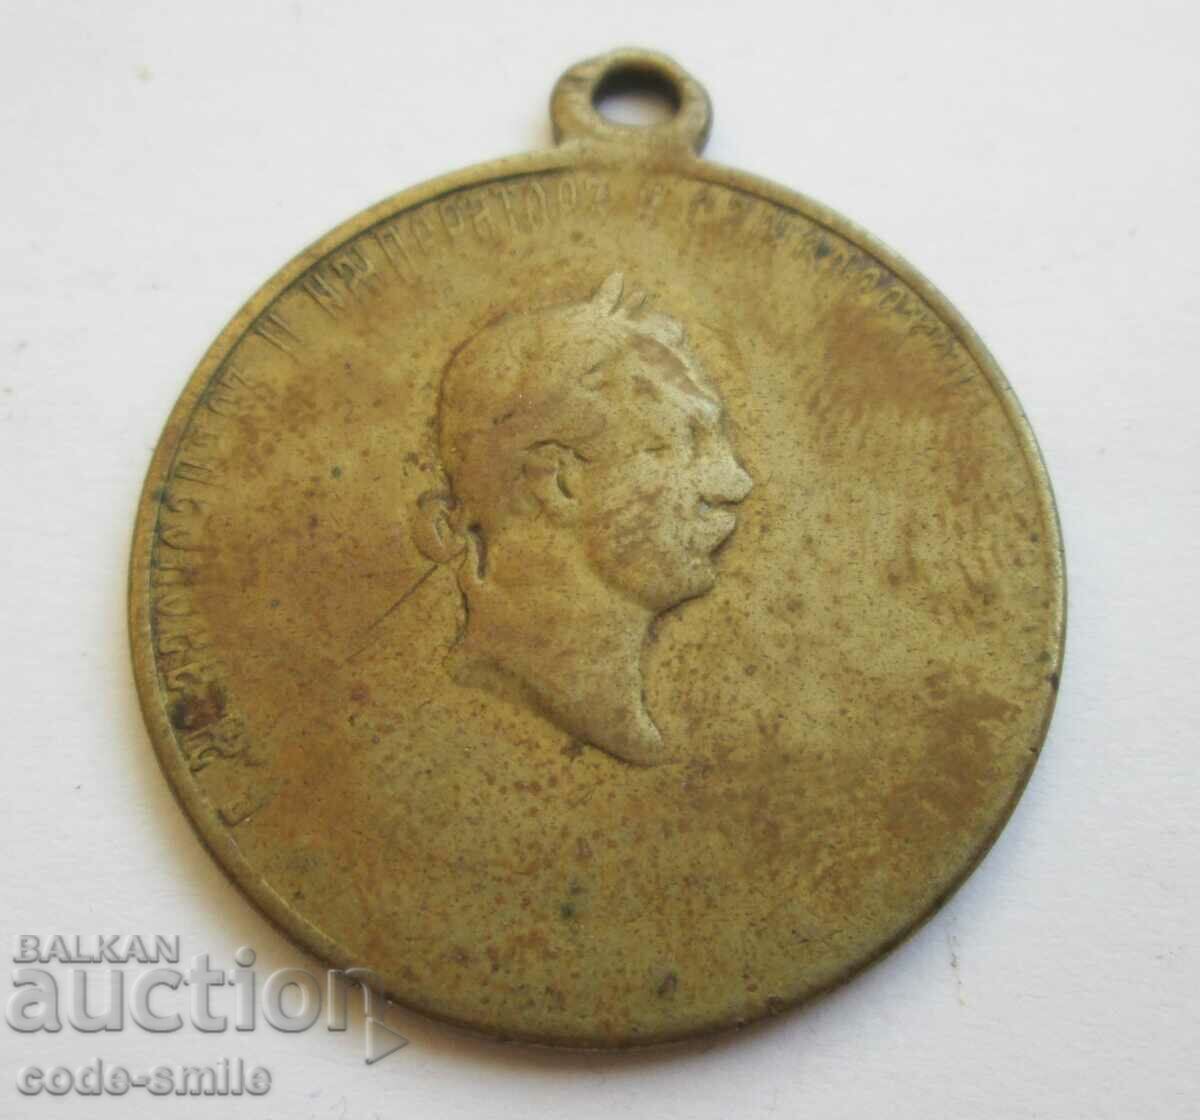 Old militia medal from the Russian-Turkish War of Independence